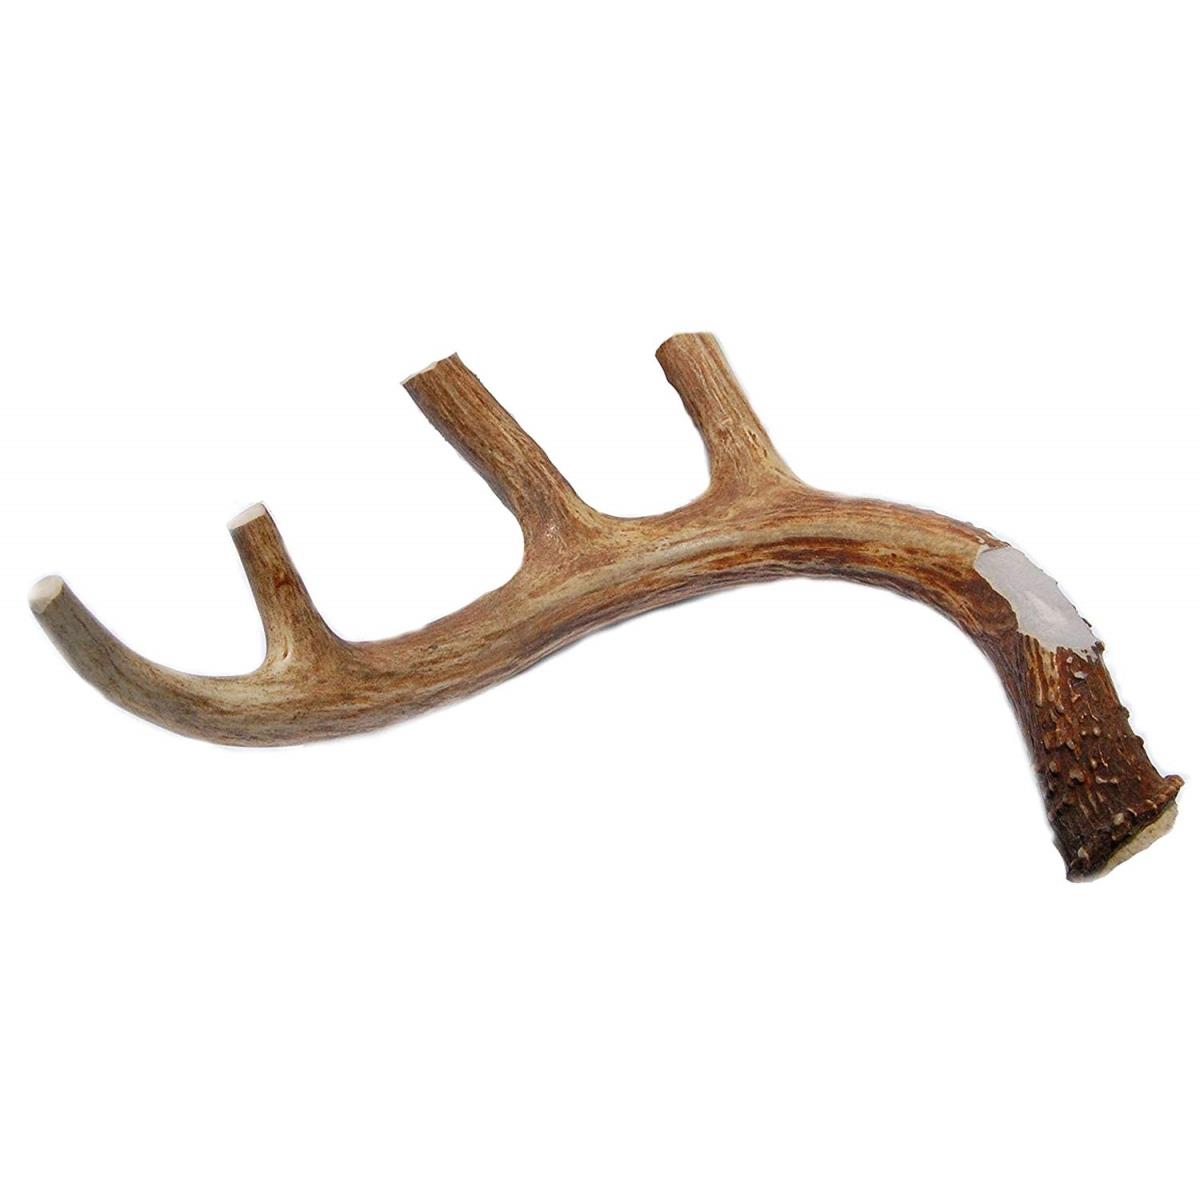 Rn20013 Whole Deer Antler For Dogs - Extra Large